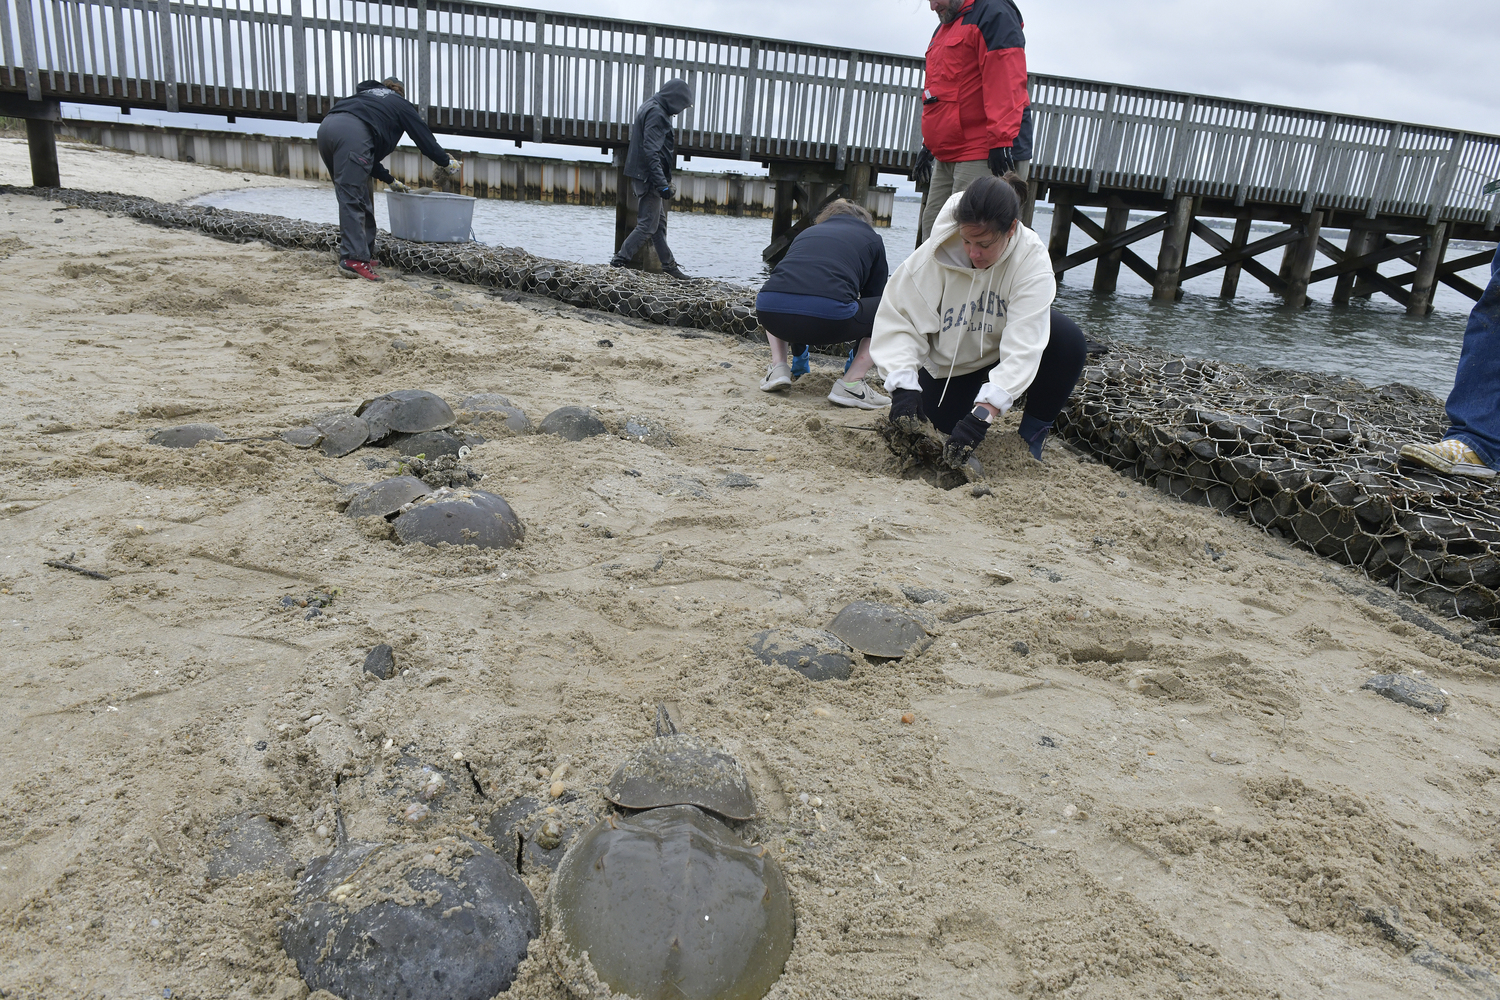 Volunteers answered a call for help from Carolyn Munaco to help move stranded horseshoe crabs over a rock and metal barrier at the Tiana Bayside Facility in Hampton Bays on Friday morning.  DANA SHAW